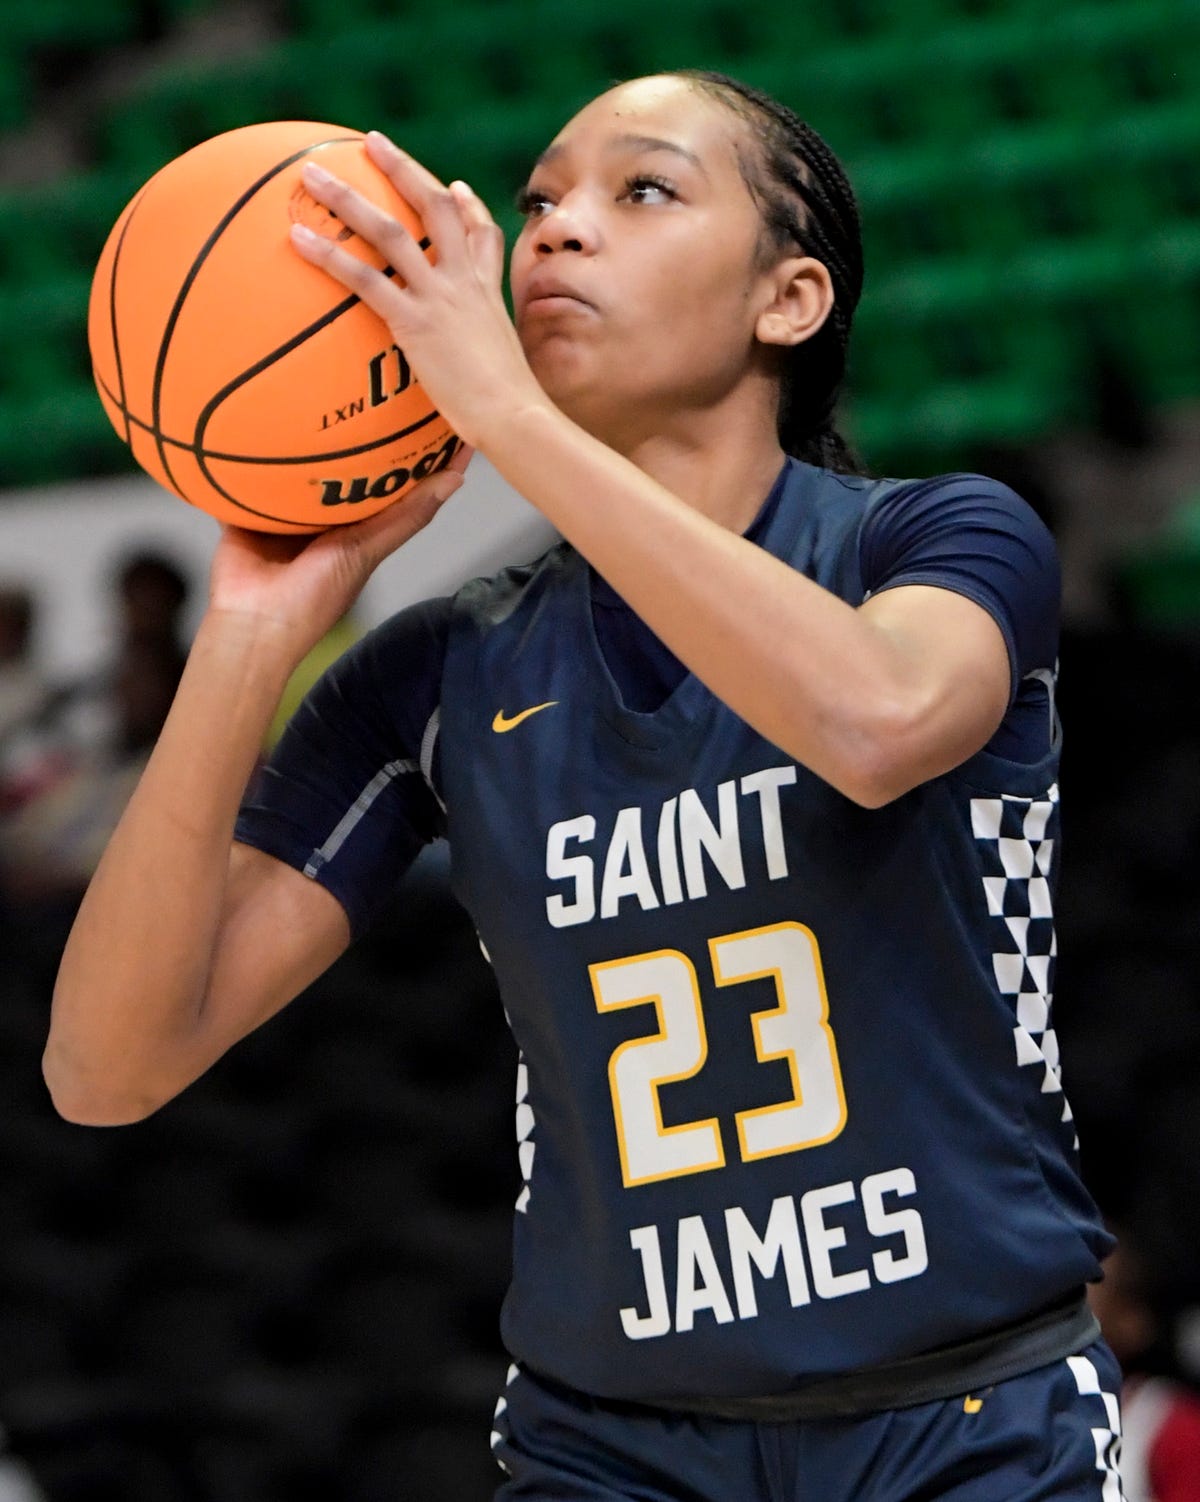 Saint James Girls Basketball Dominates in Victory Over Sumter Central, Ava Card Shines with 24 Points